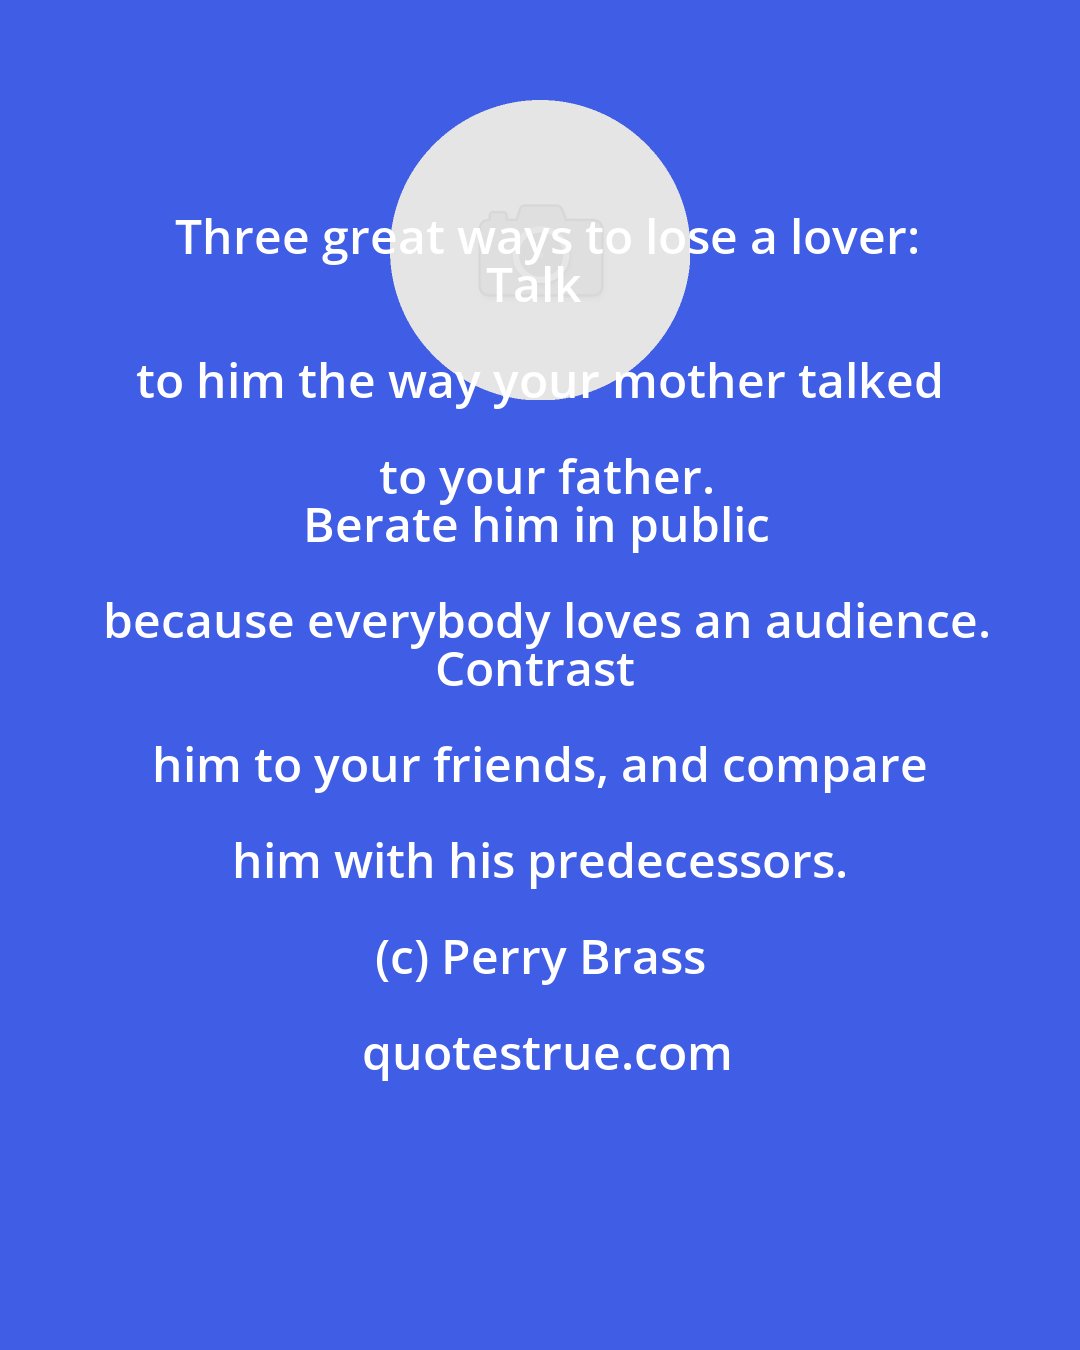 Perry Brass: Three great ways to lose a lover:
Talk to him the way your mother talked to your father.
Berate him in public because everybody loves an audience.
Contrast him to your friends, and compare him with his predecessors.